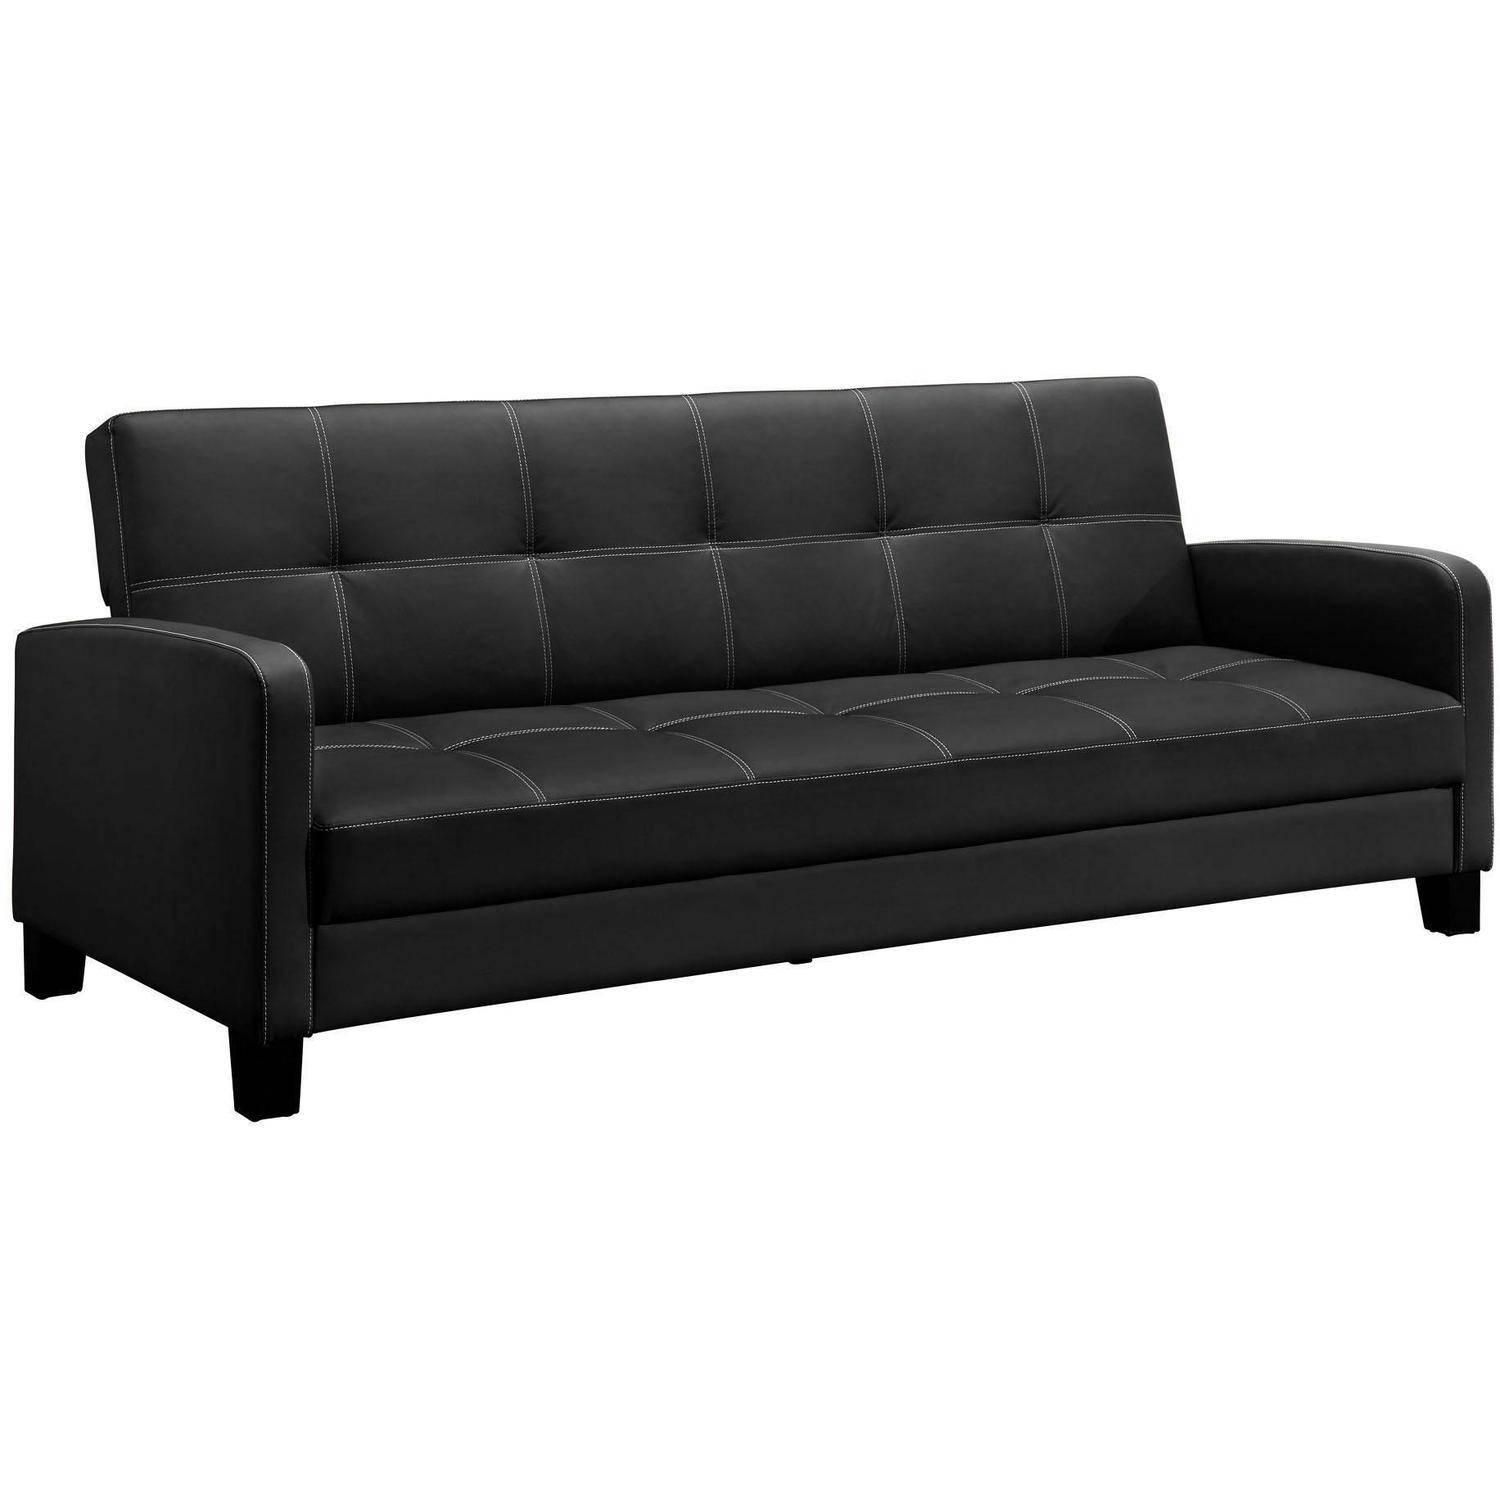 Sofas Center : Black Leather Sleeper Sofas Sofa Sale Queen Trend In Black Leather Convertible Sofas (View 11 of 20)